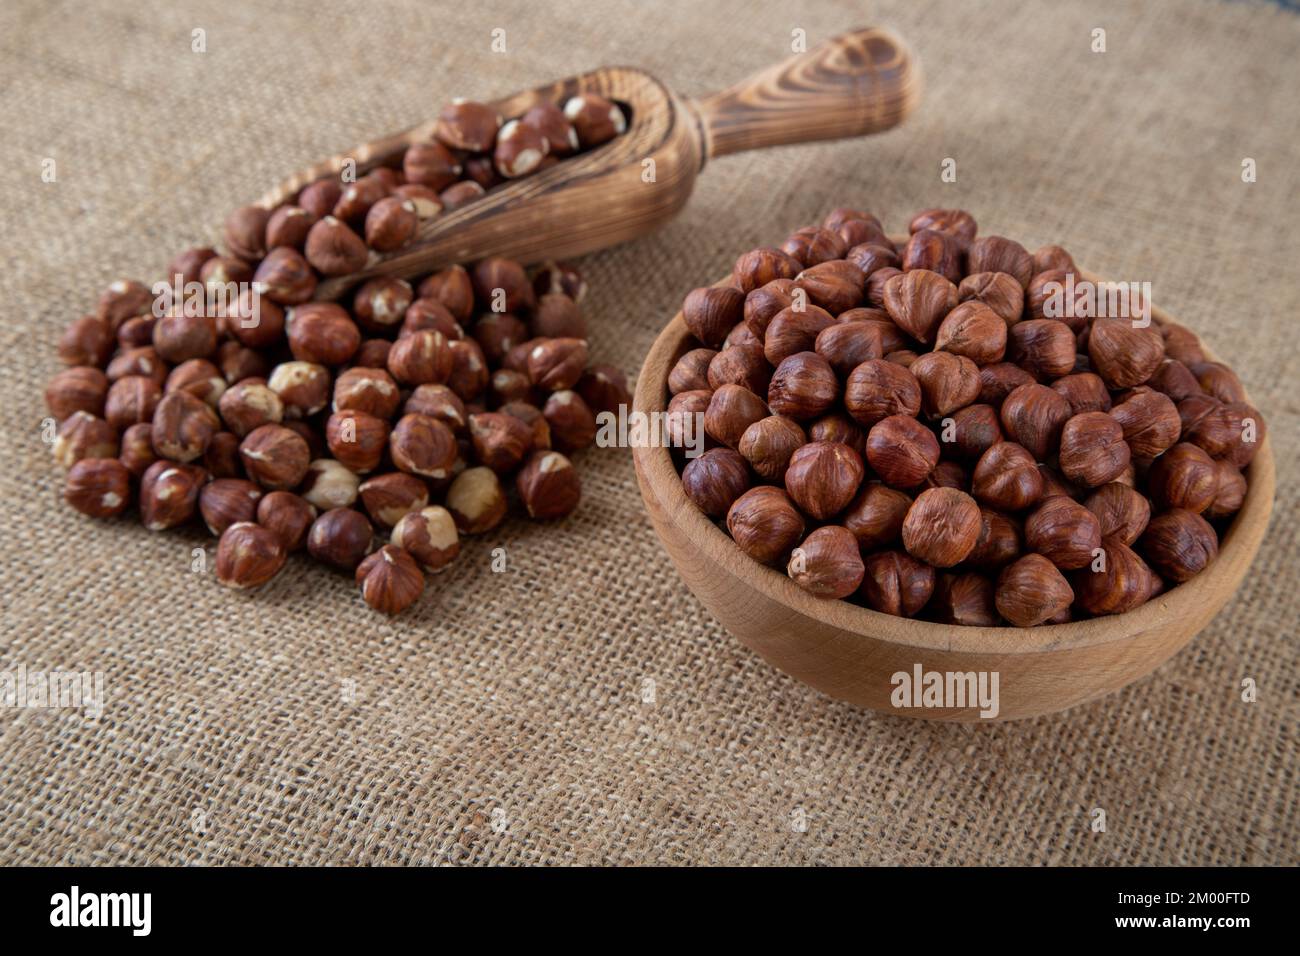 Top view of a bowl full of hazelnuts Stock Photo